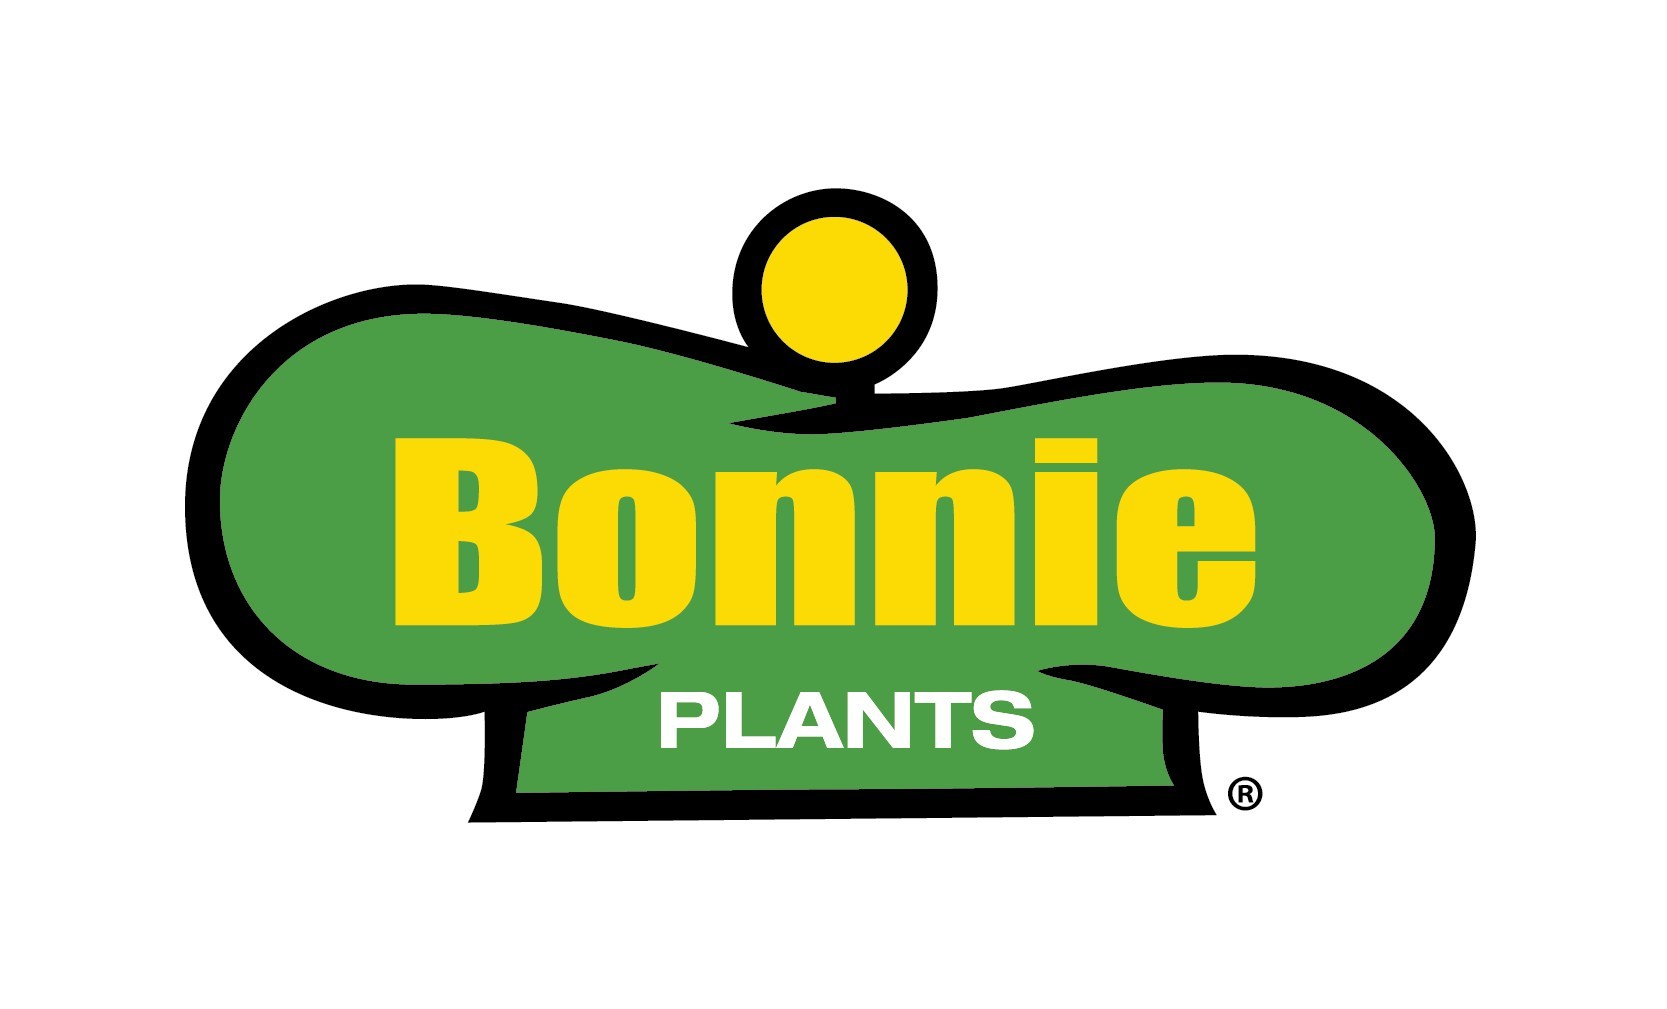 Bonnie grows 300 varieties of quality vegetable and herb plants for home gardeners across the country, with over 85 growing facilities serving the entire United States. (PRNewsfoto/Bonnie Plants)